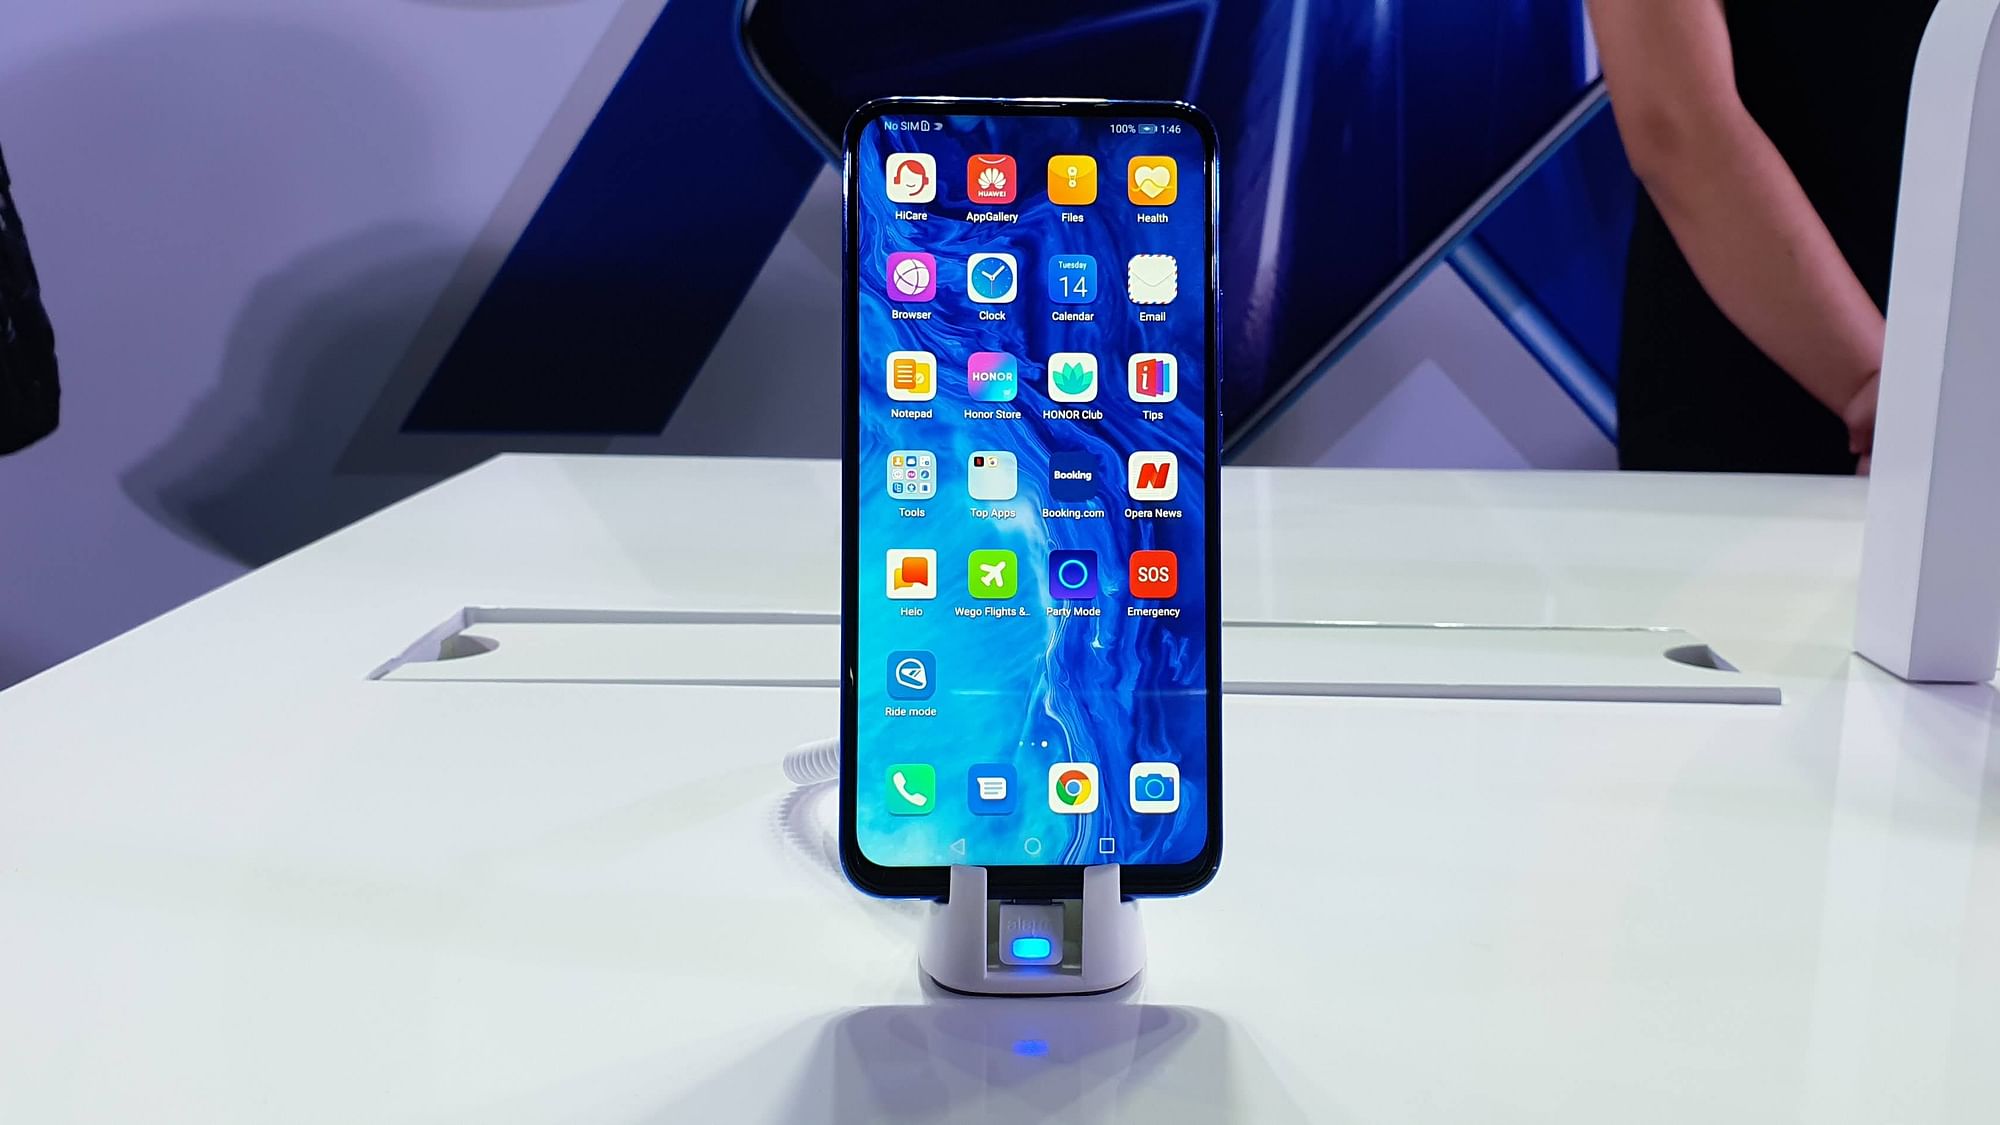 The Honor 9x comes with a 6.59-inch display.